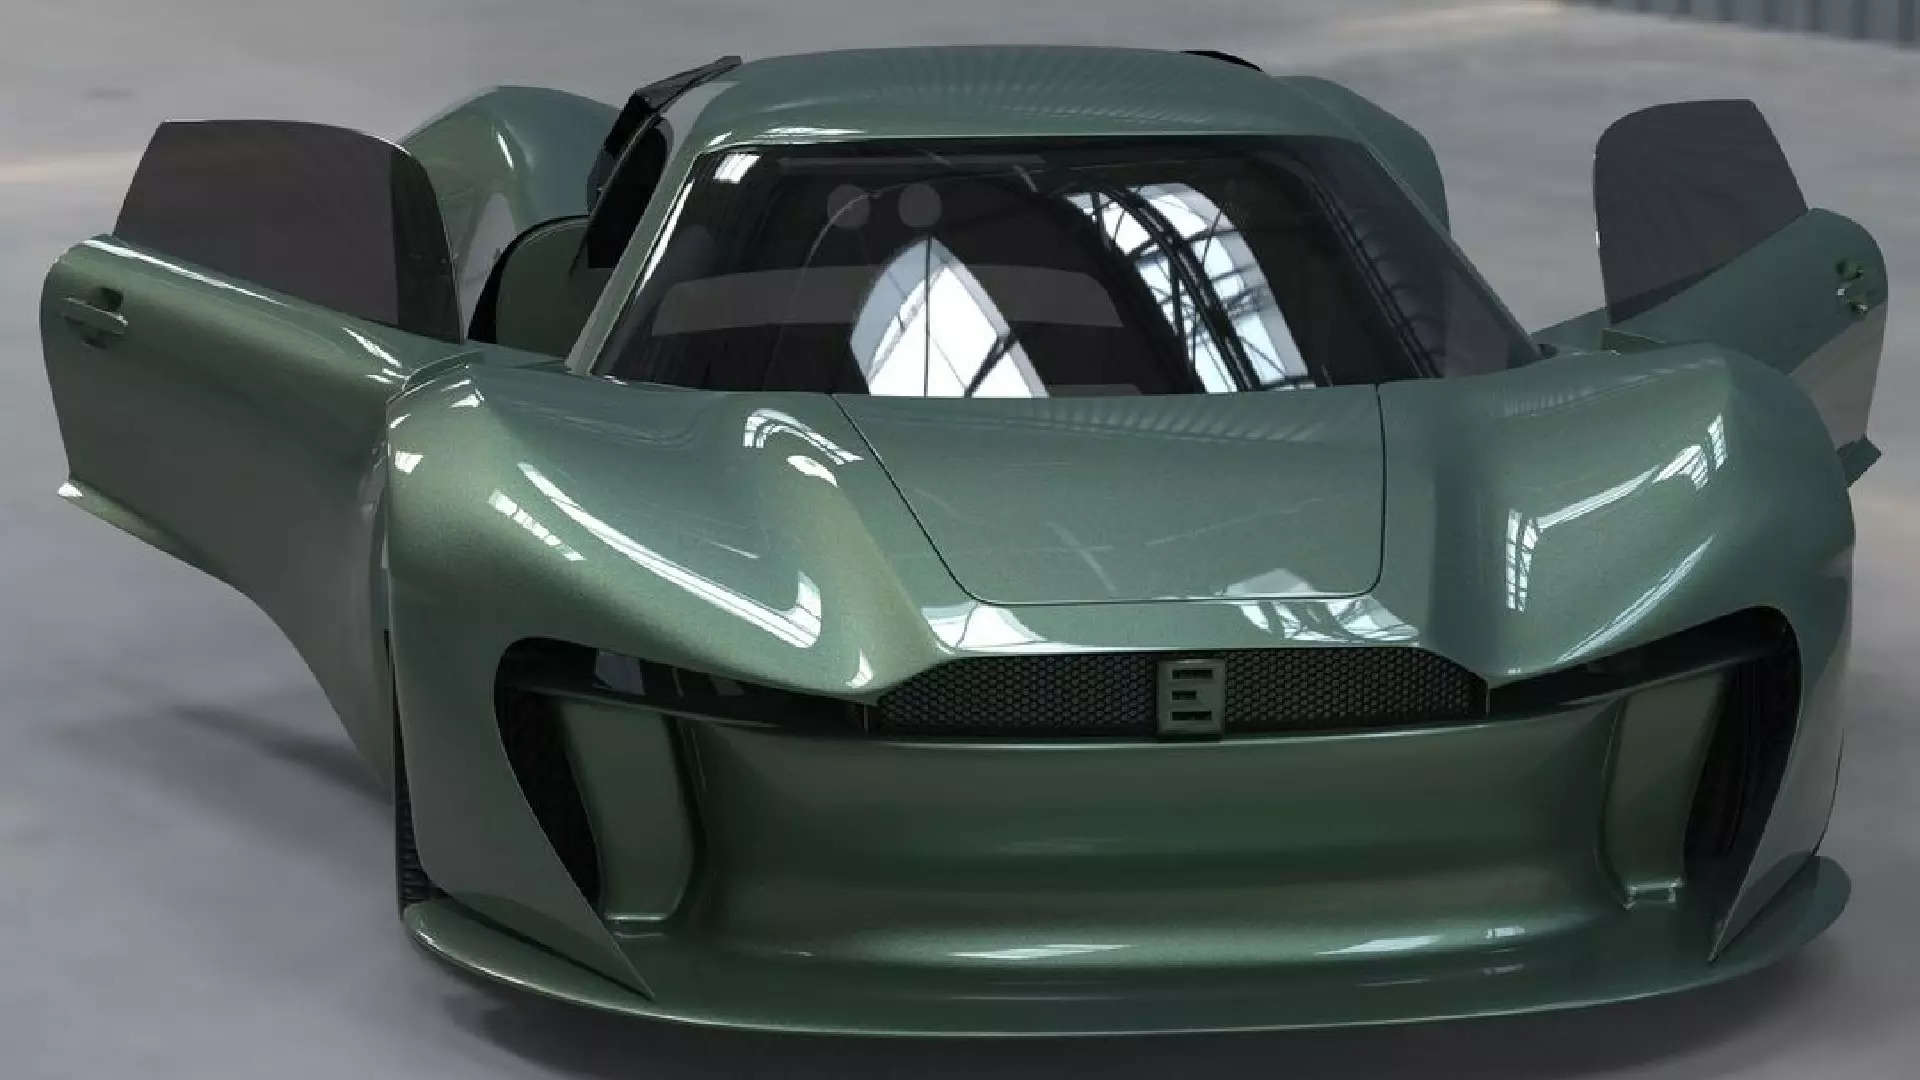 Taliban's first “Indigenously built” supercar - Mada 9: Engine,  Performance, Chassis explained